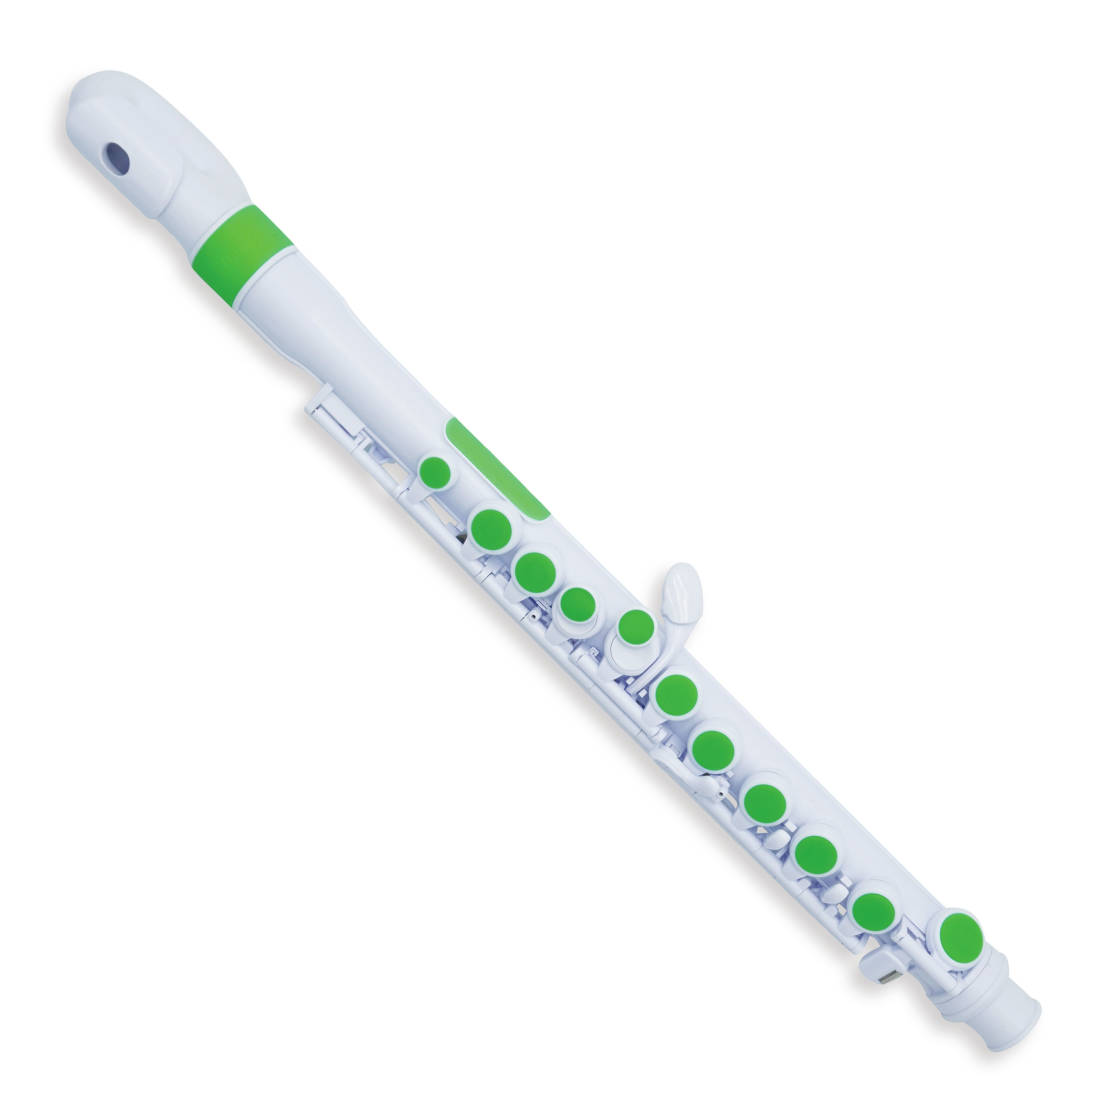 jFlute 2.0 Kit with Donut Head Joint - White/Green